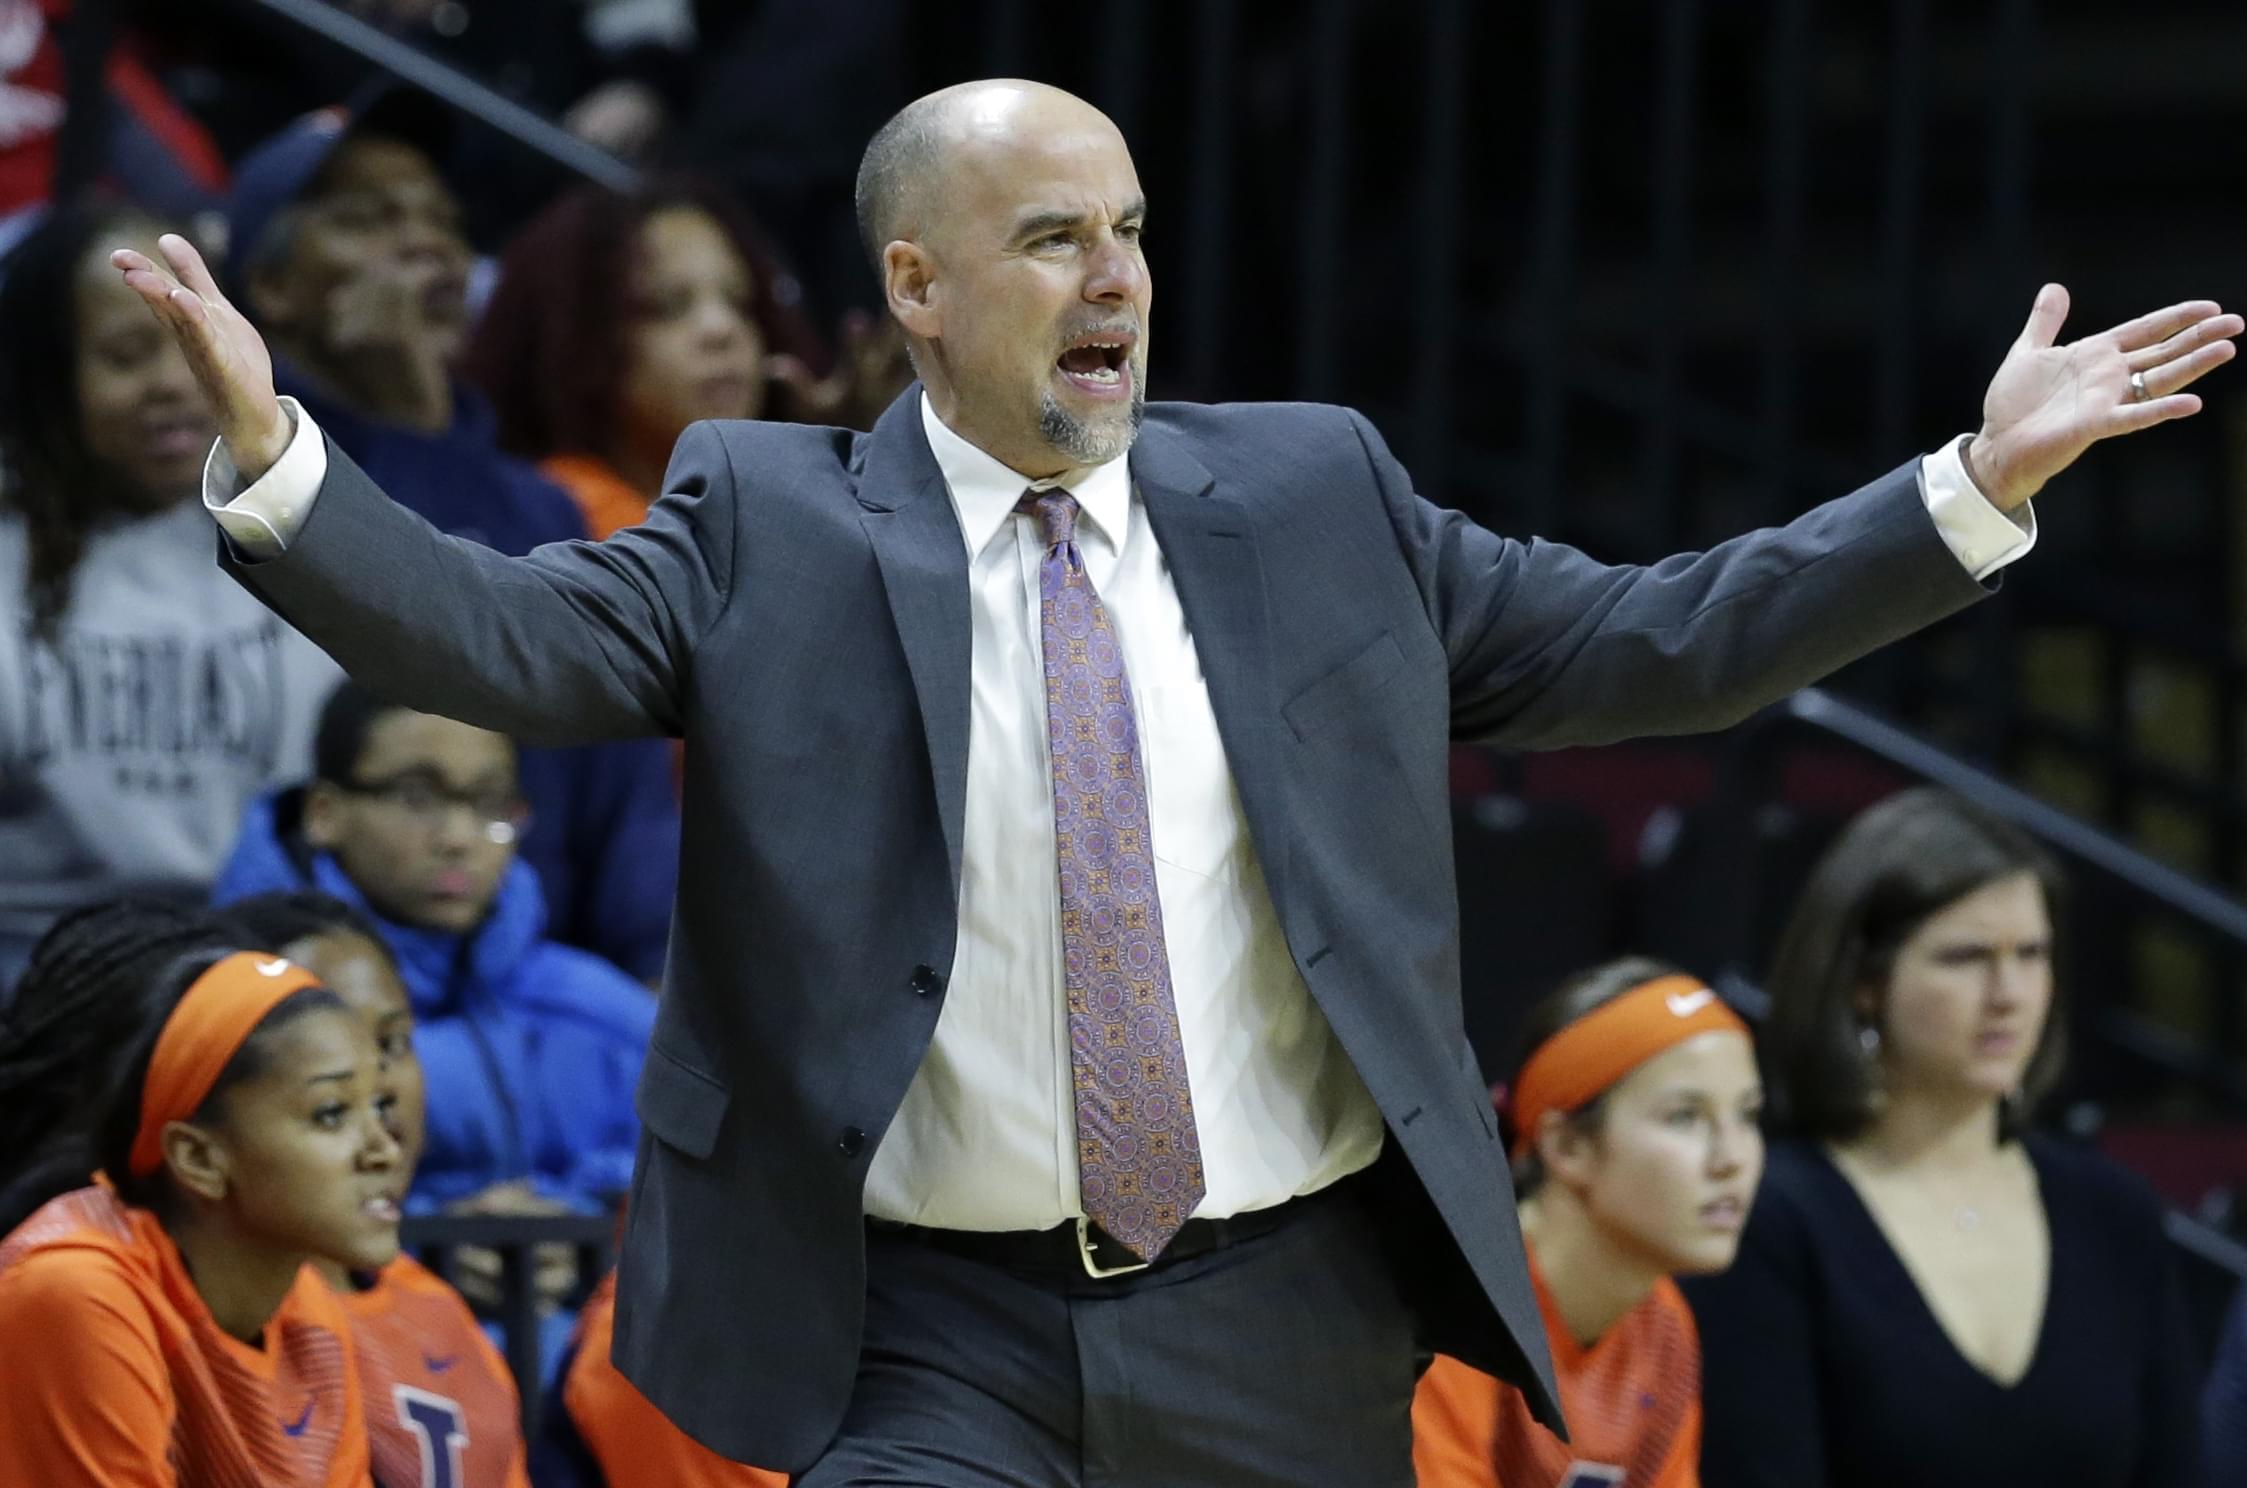 Illinois head coach Matt Bollant reacts to a call against Rutgers on Tuesday, February 17 in Piscataway, N.J.